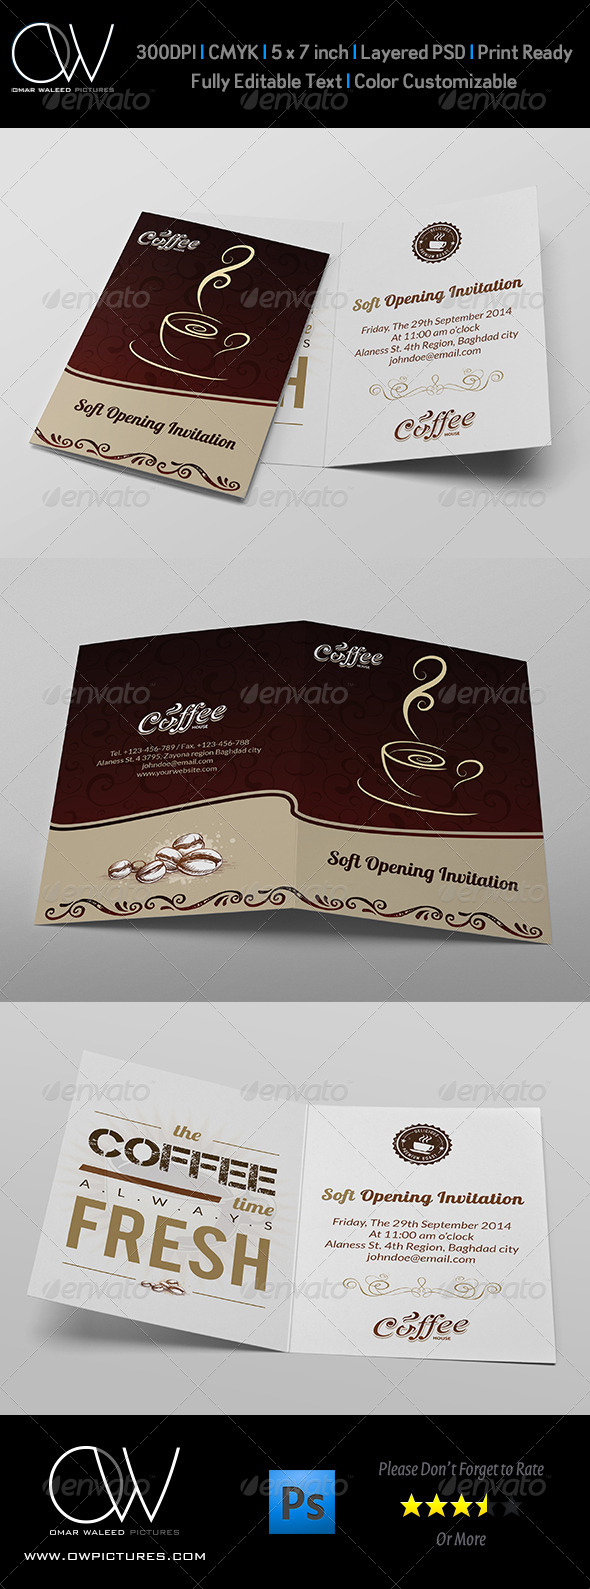 Cafe Soft Opening Invitation Card Vol.3 by OWPictures | GraphicRiver